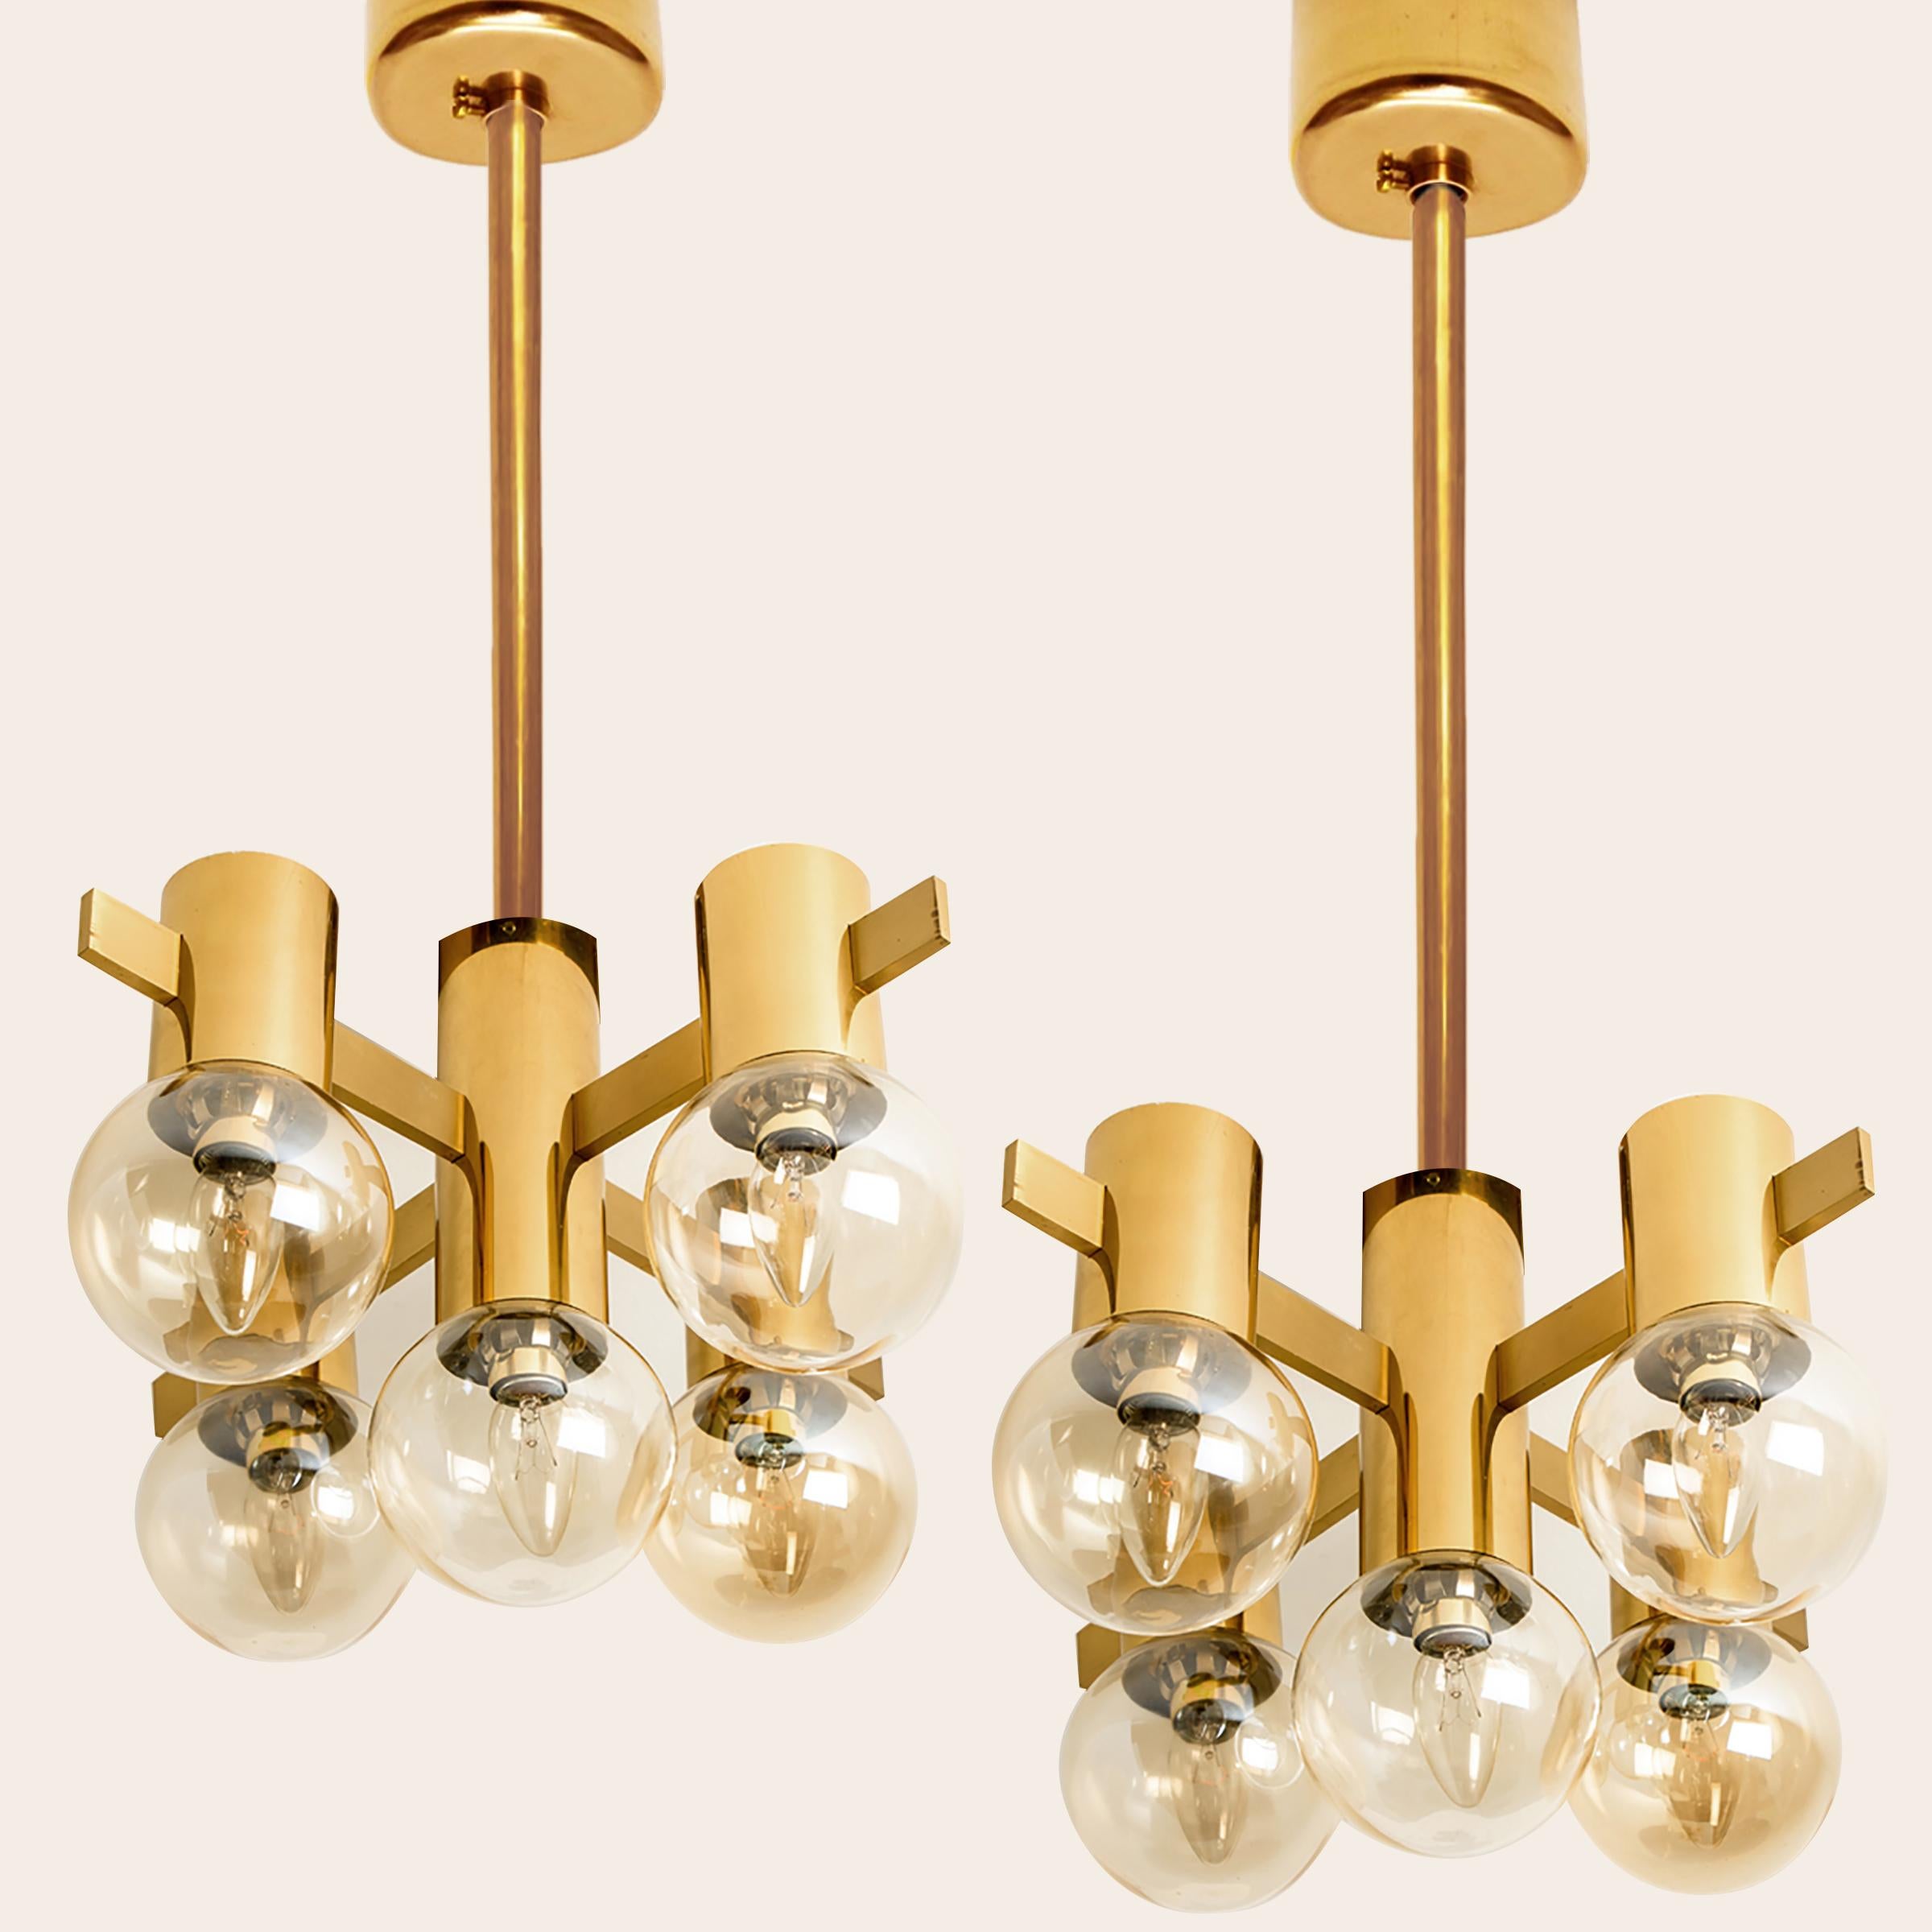 Set of Three Brass and Glass Light Fixtures in the Style of Jakobsson, 1960s For Sale 13